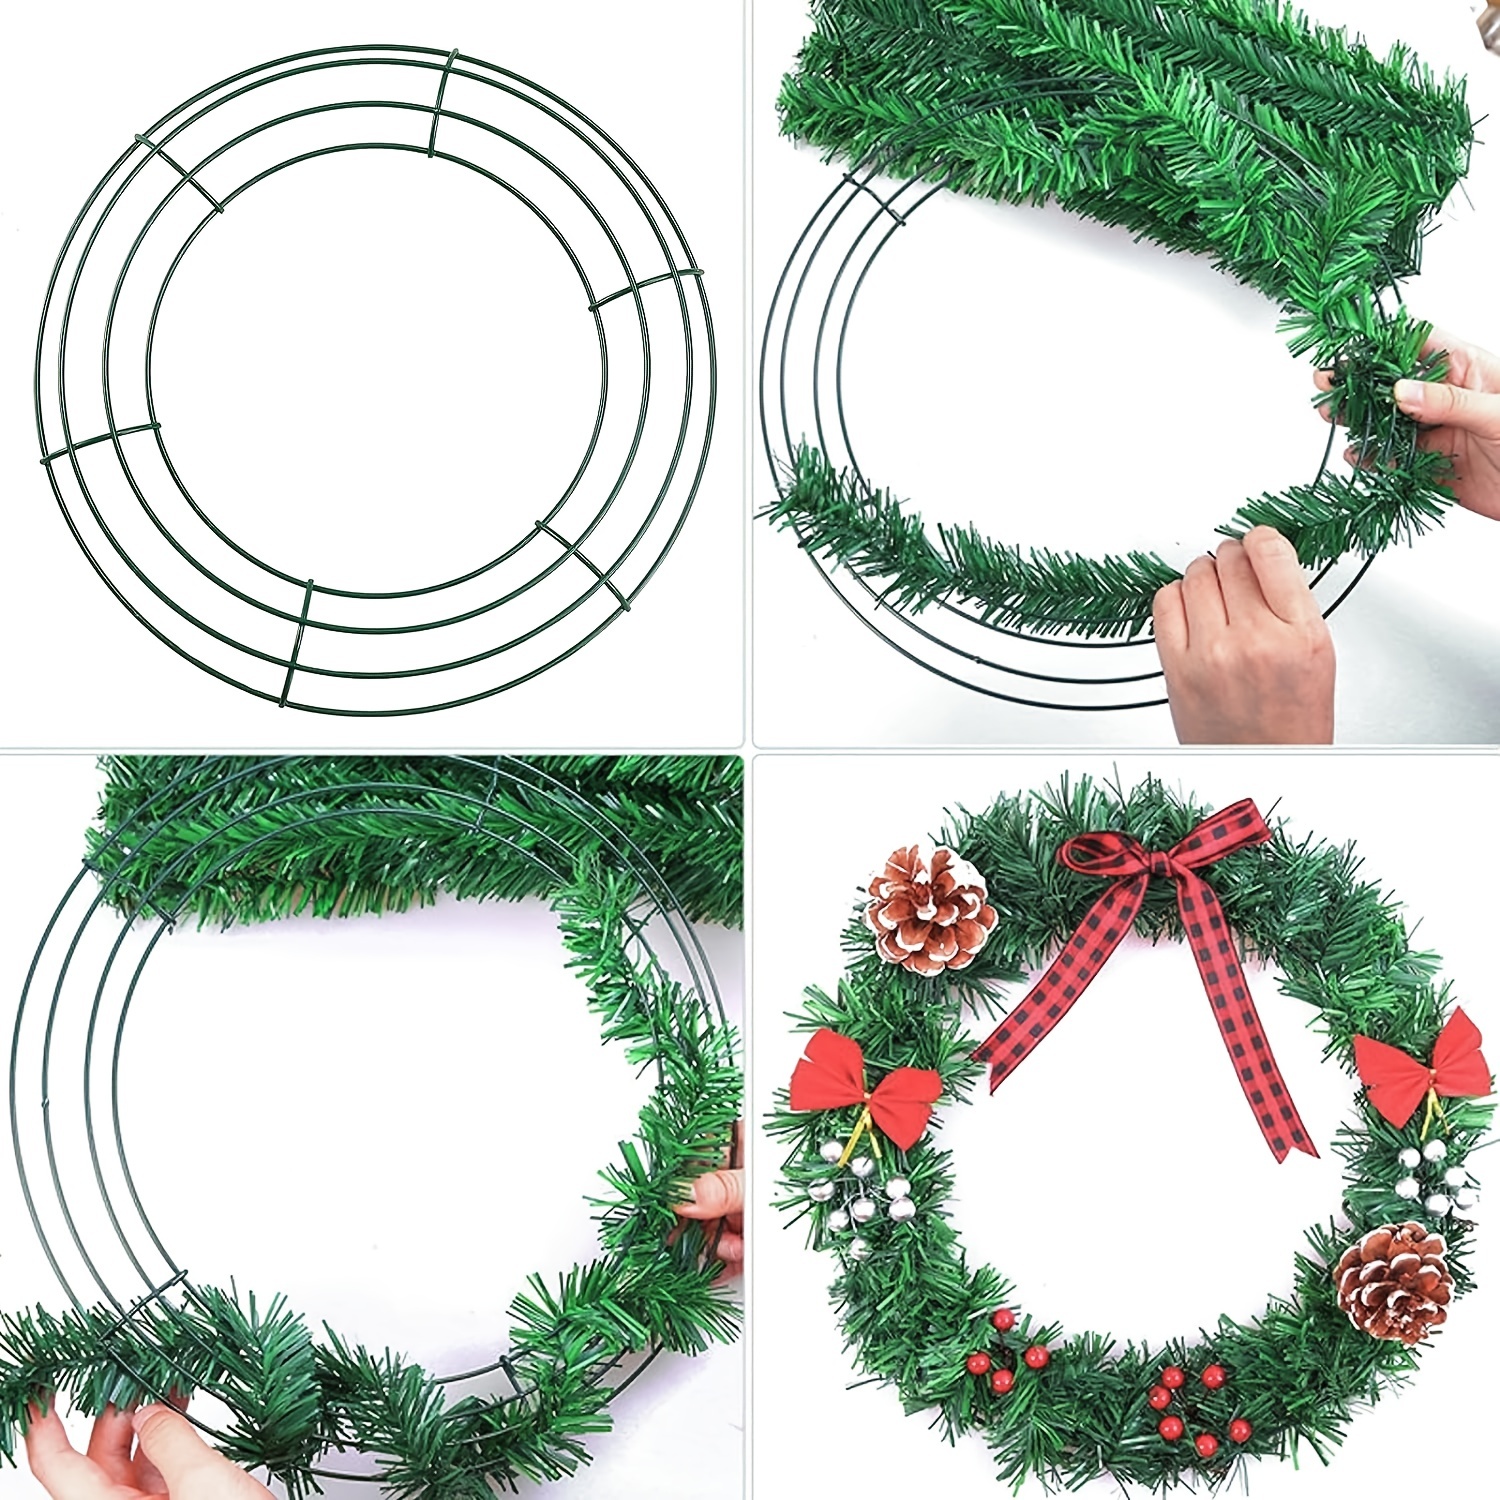 Muczore 4 Packs Wreath Frame Green Round DIY Wreath,Wire Wreath Frame Making Ring DIY Macrame Floral Crafts Wreath Form Christmas Decoration Door